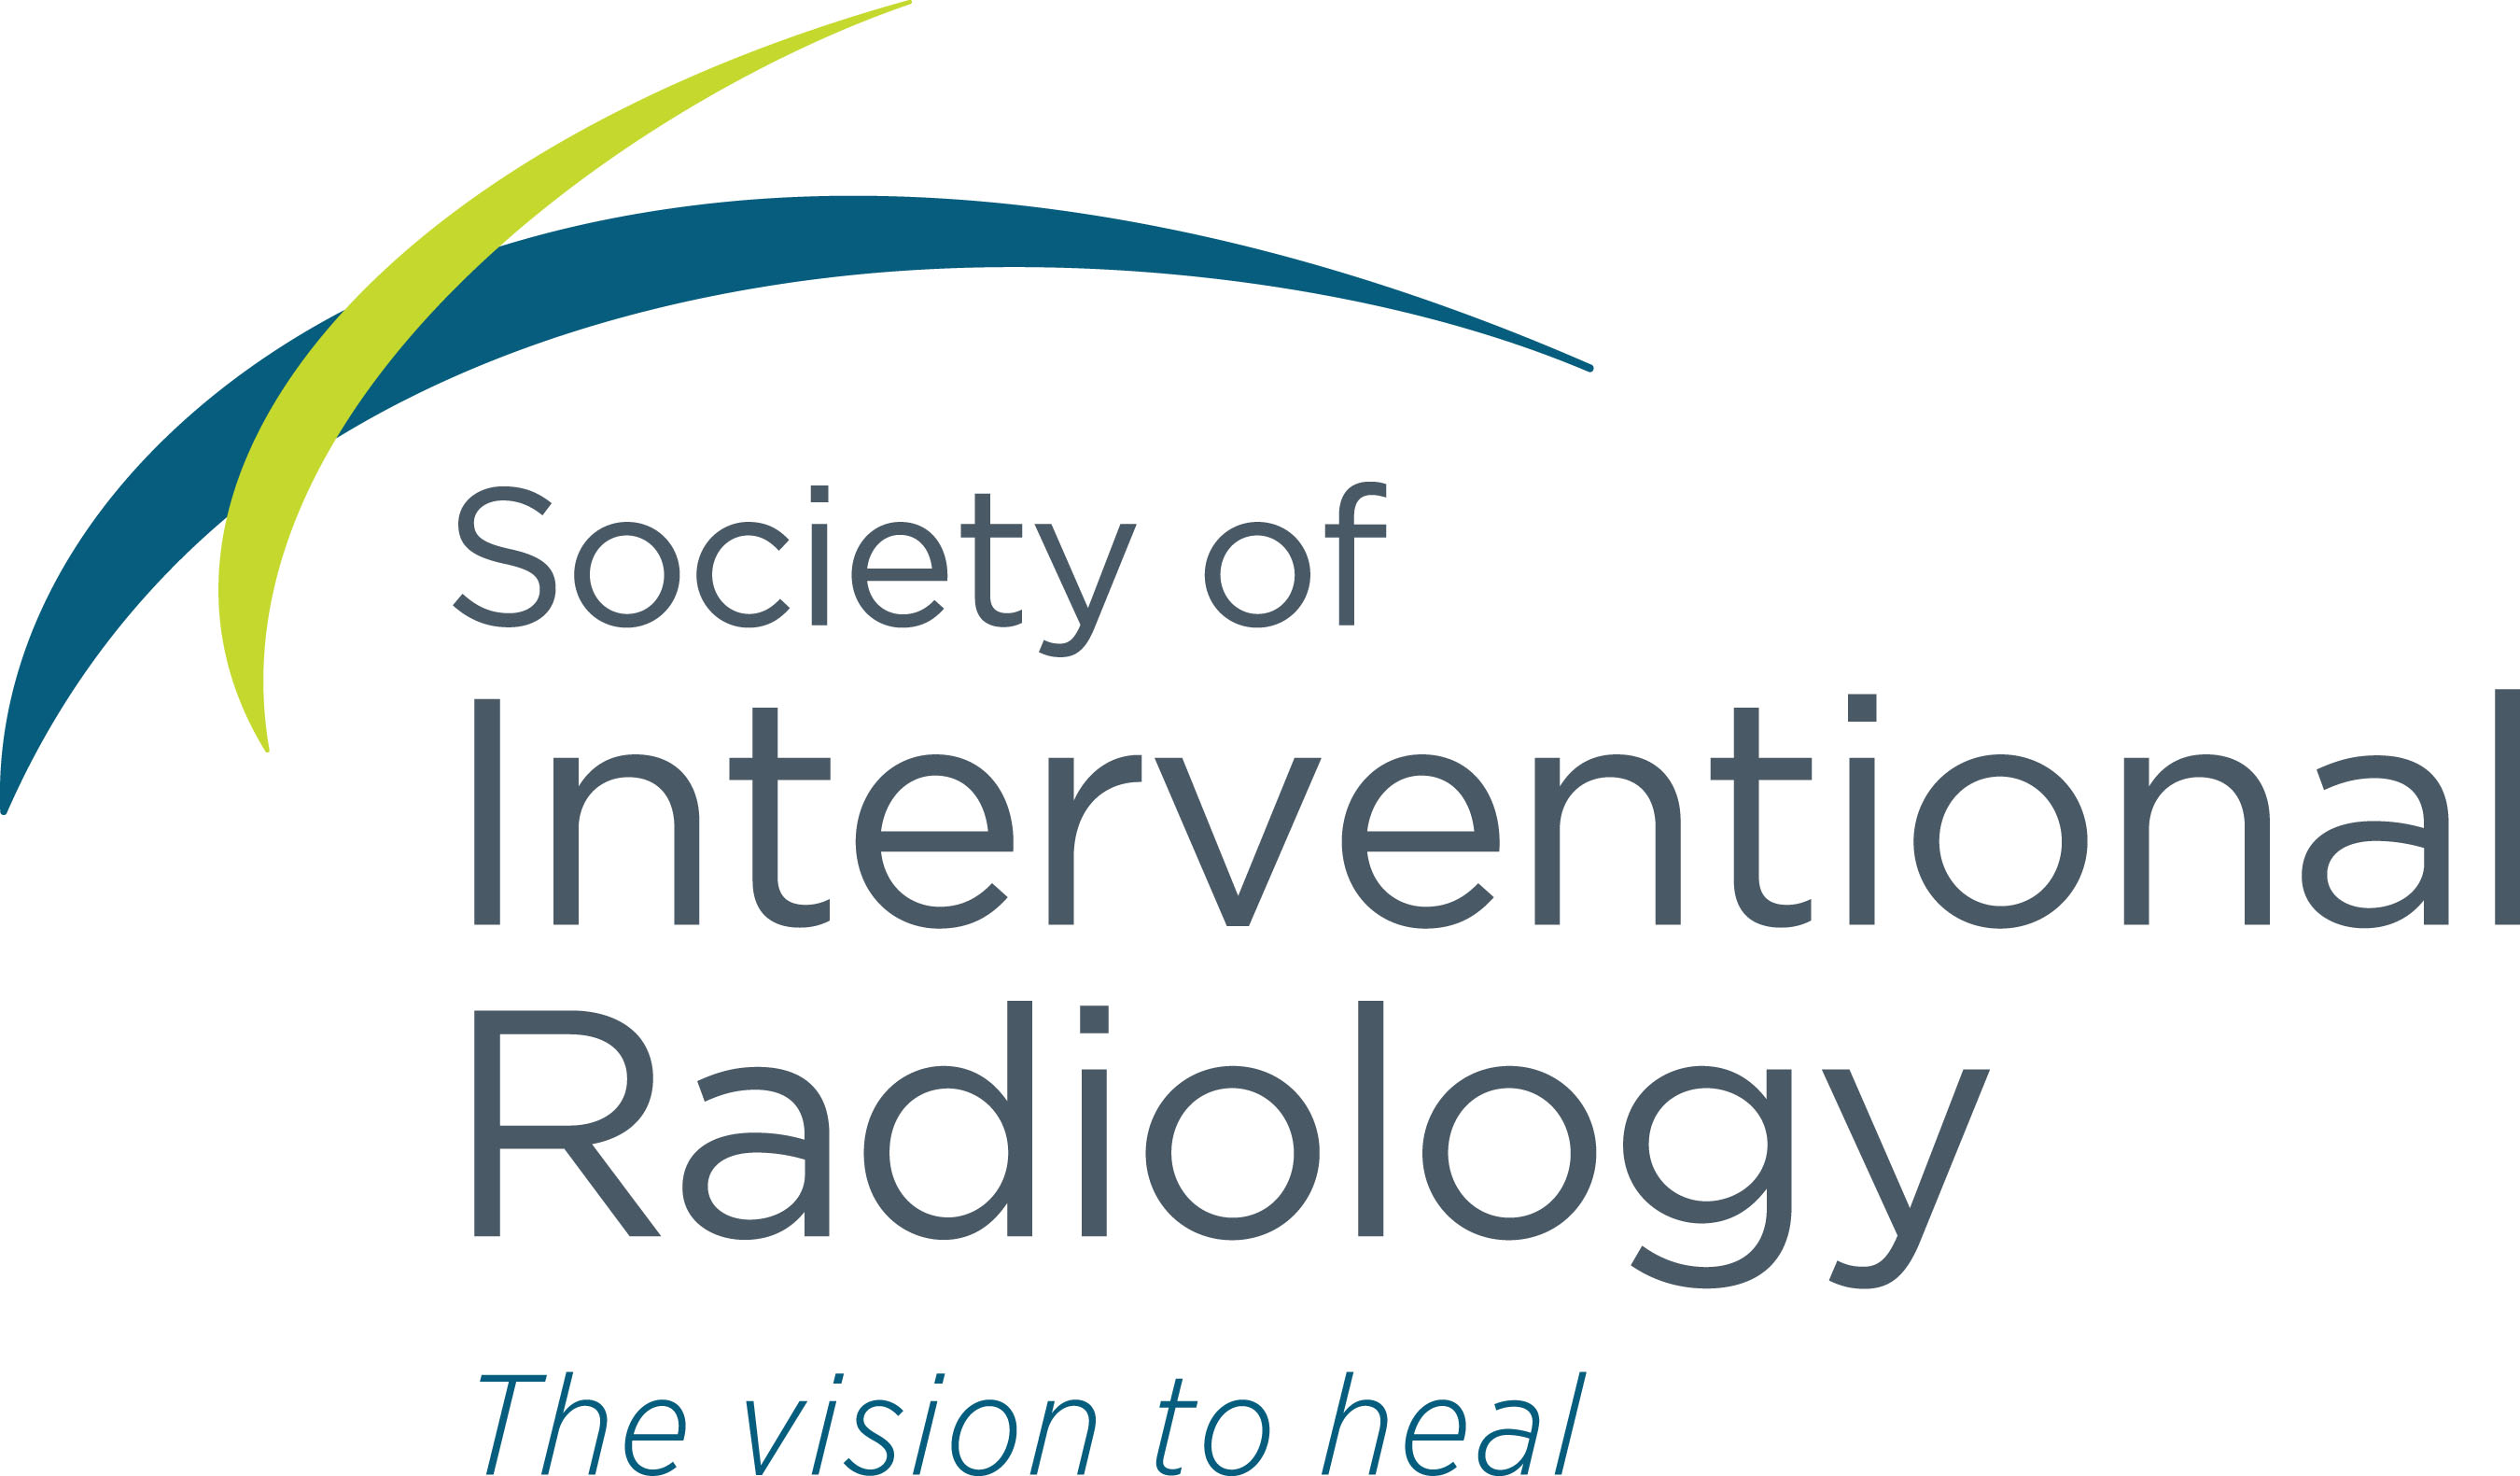 SIR 2020 - 45th Annual Scientific Meeting of The Society Of Interventional Radiology